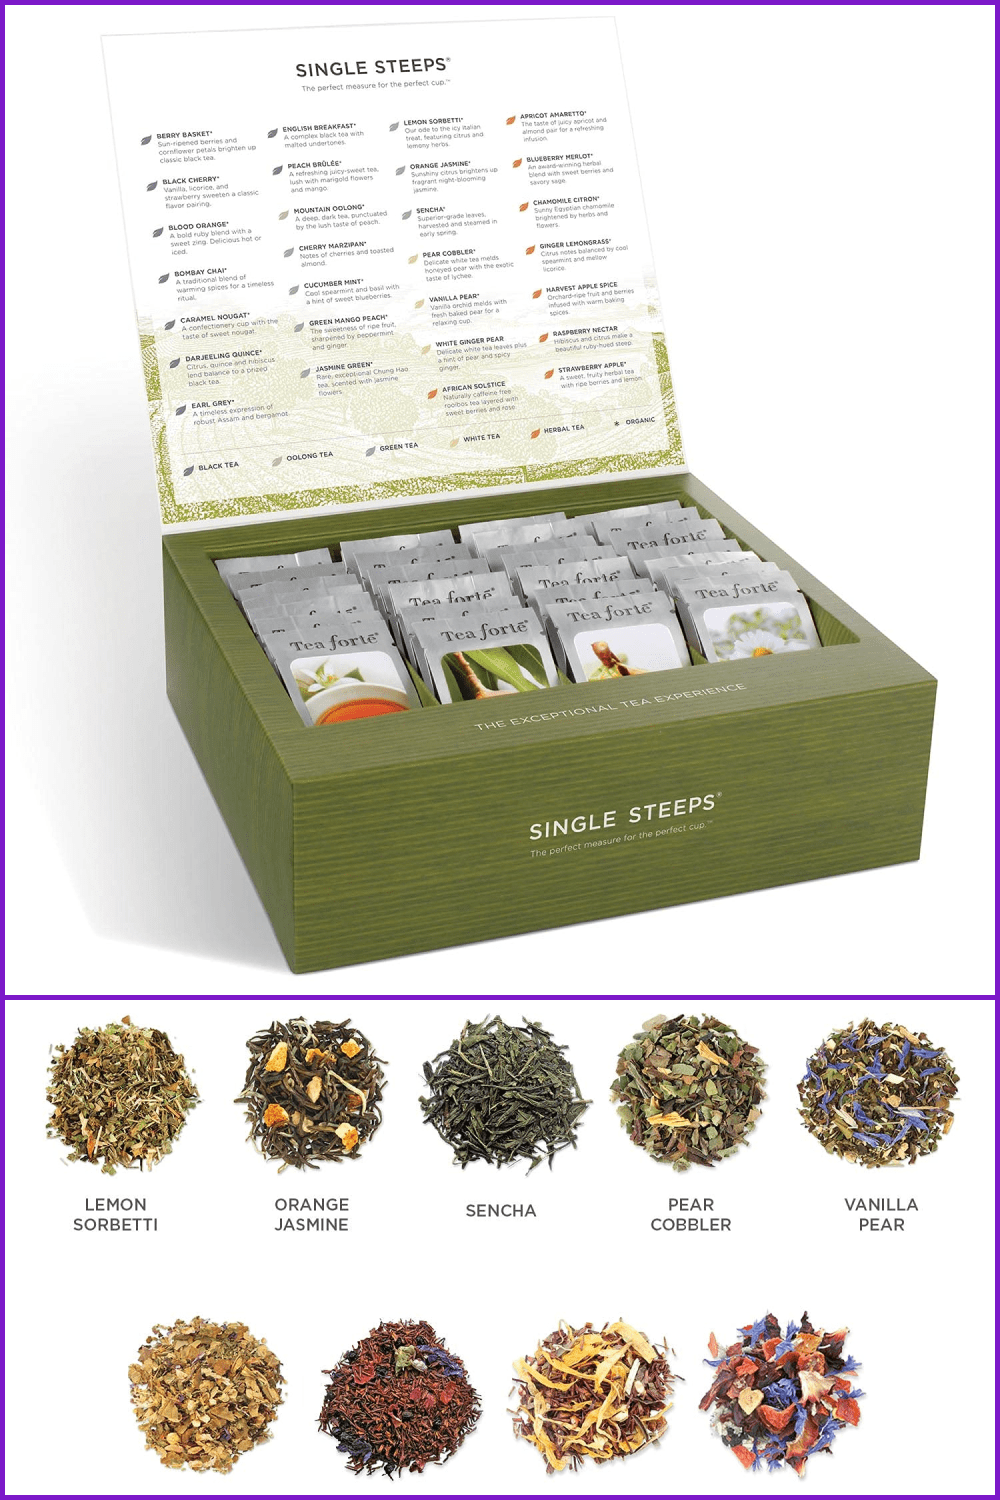 Photos of the box and varieties of tea.